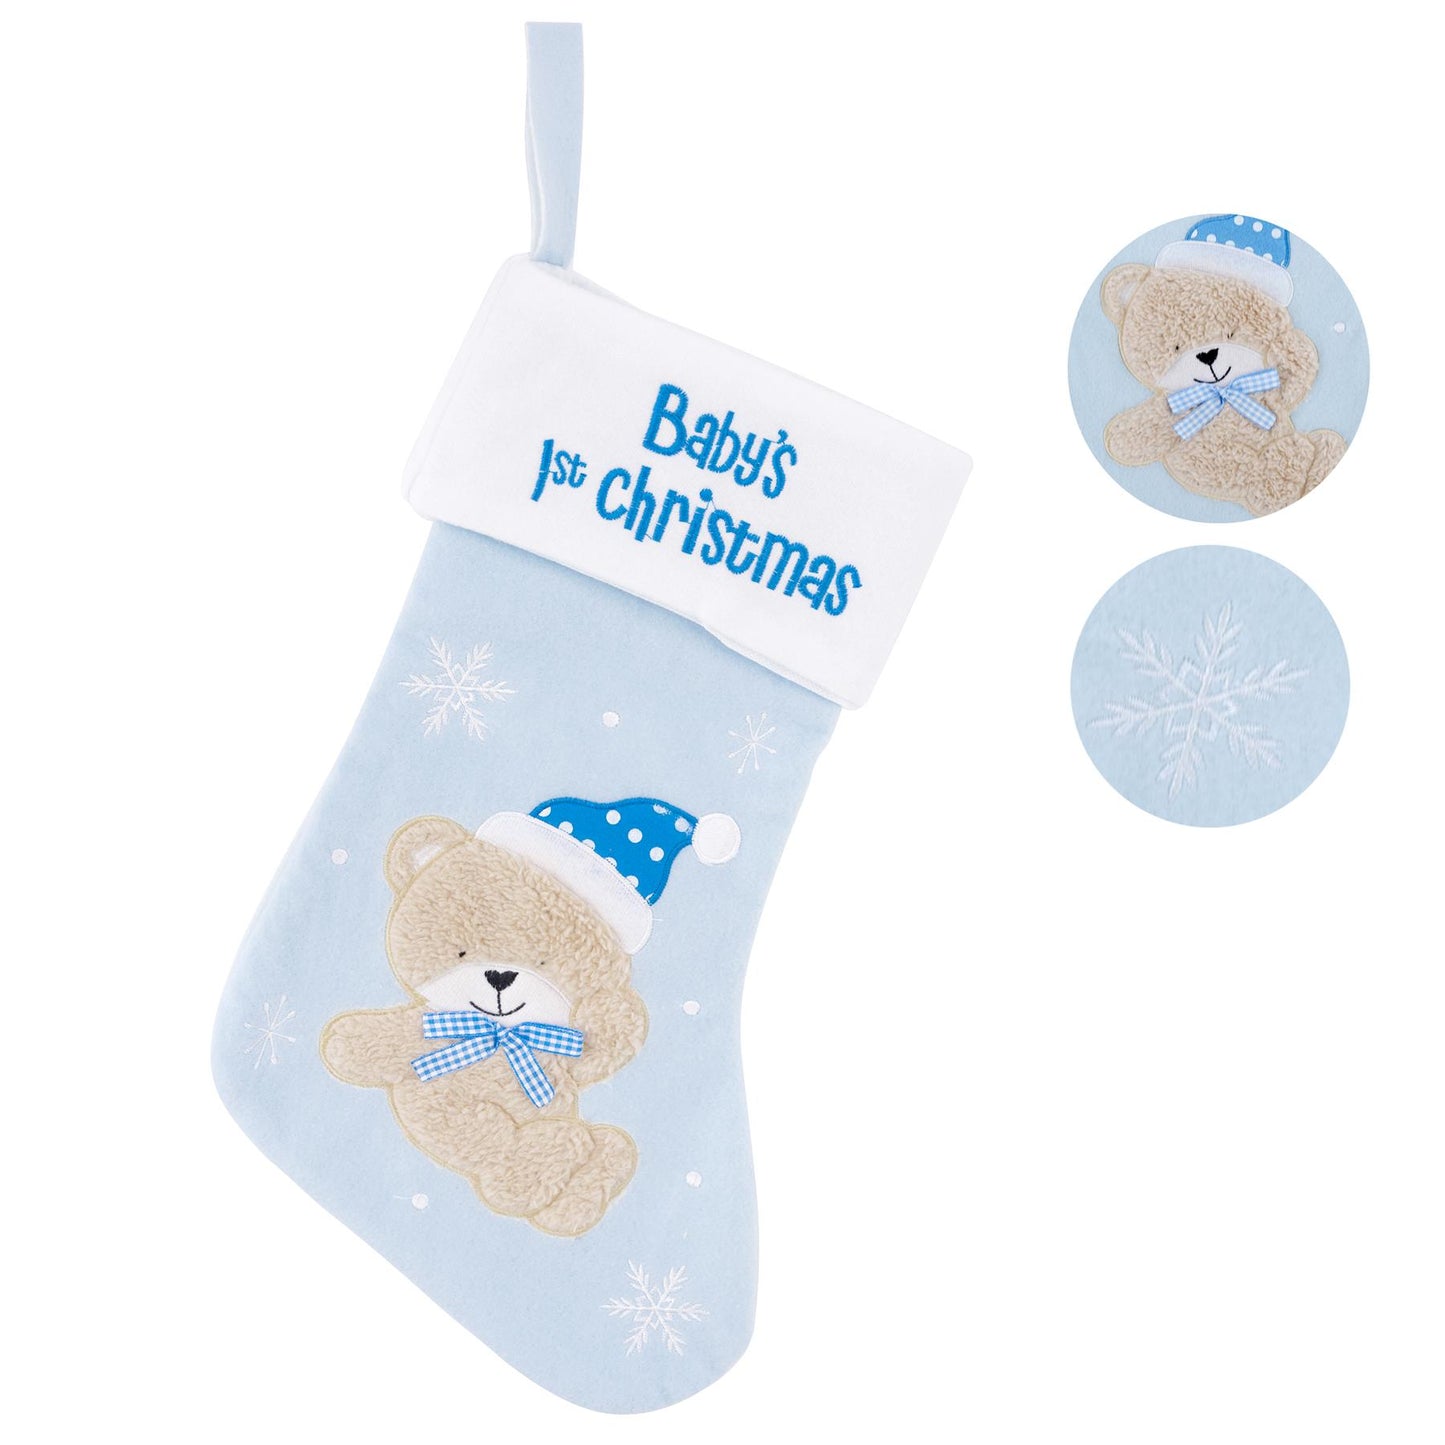 Baby's 1st Christmas Stocking by The Magic Toy Shop - UKBuyZone